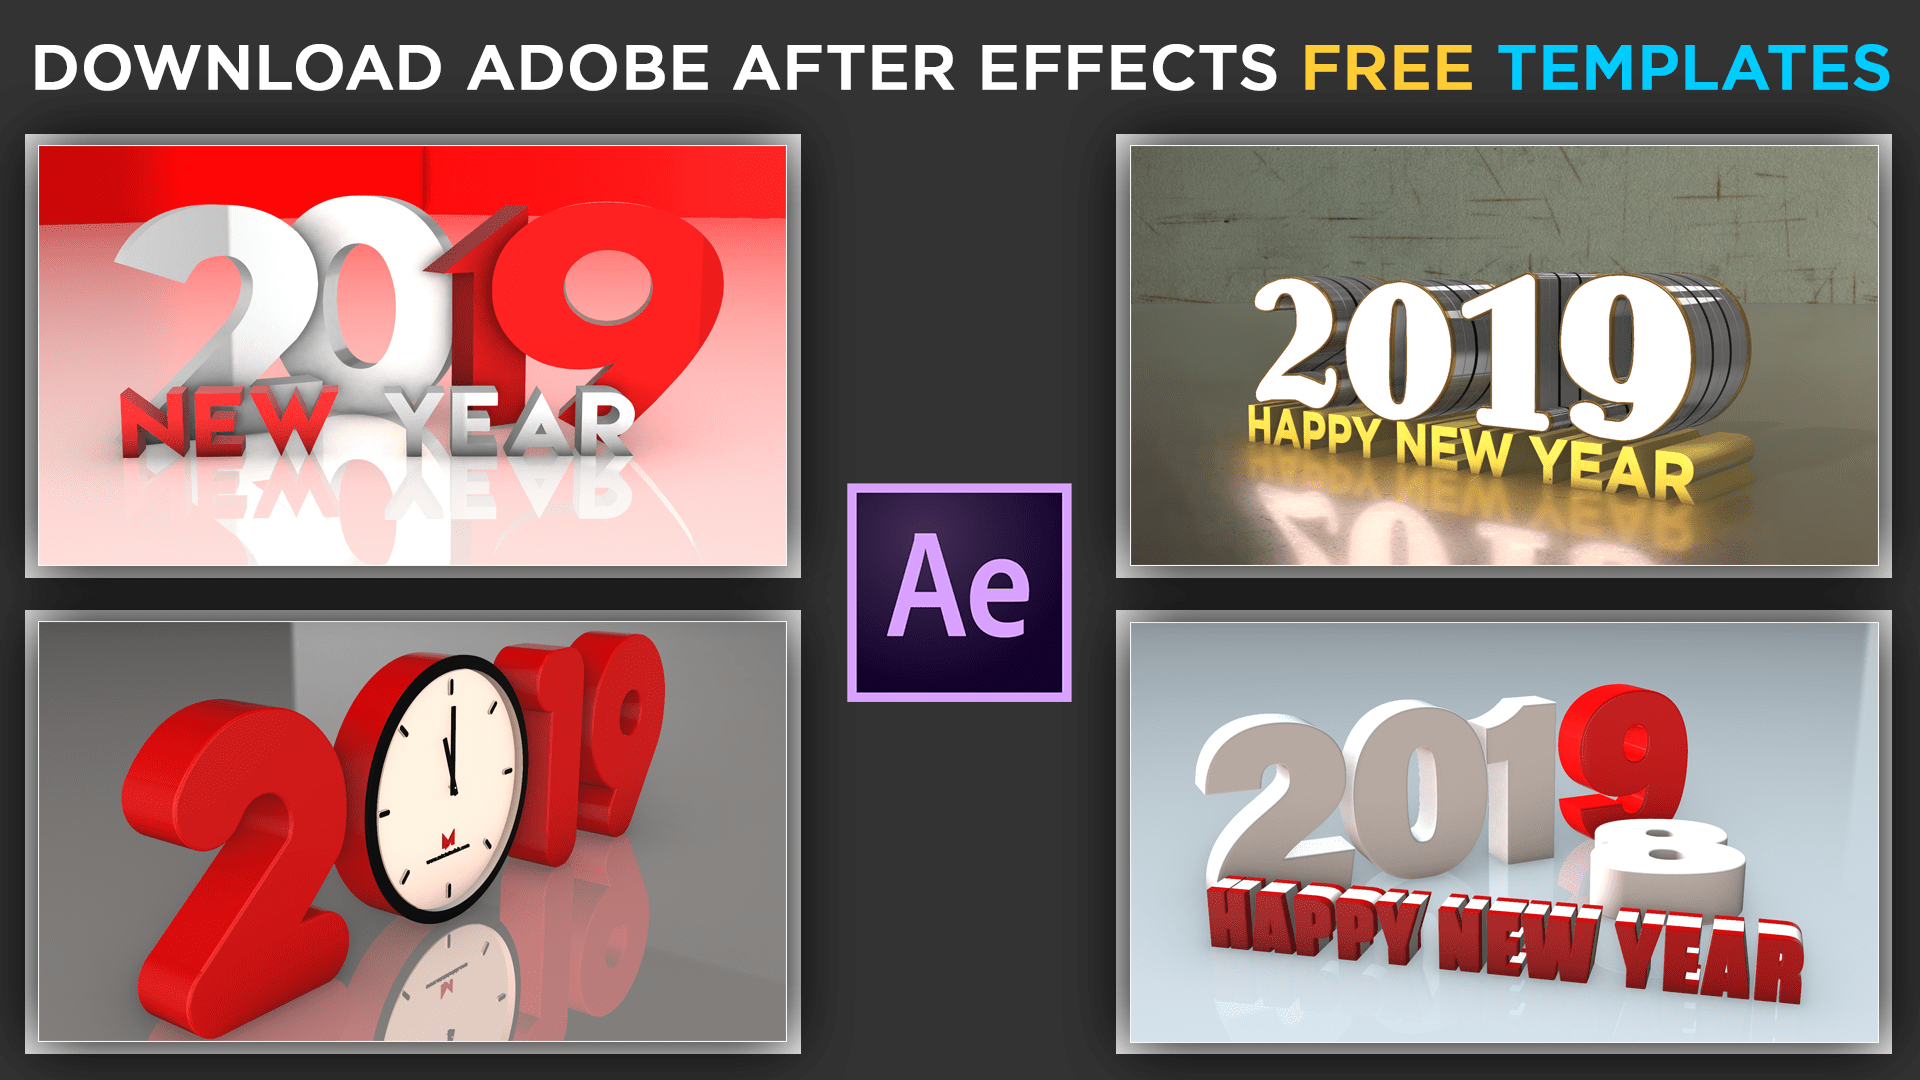 Download Free After Effects Template - Adobe After Effects , HD Wallpaper & Backgrounds